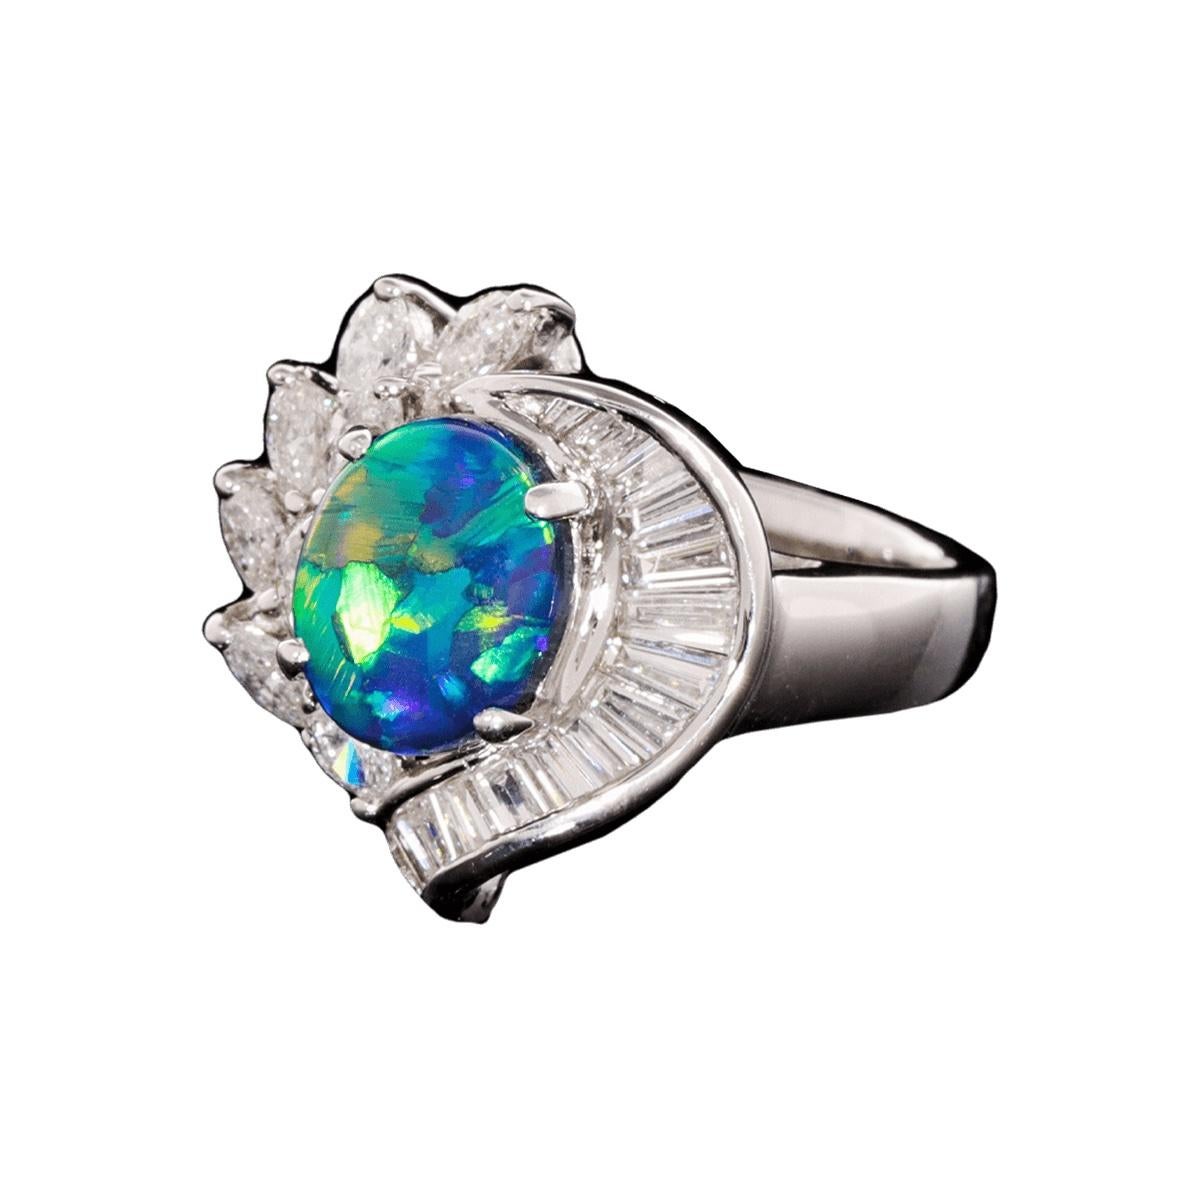 Cabochon Australian 2.05ct Black Opal, Diamond and 18K White Gold Ring For Sale